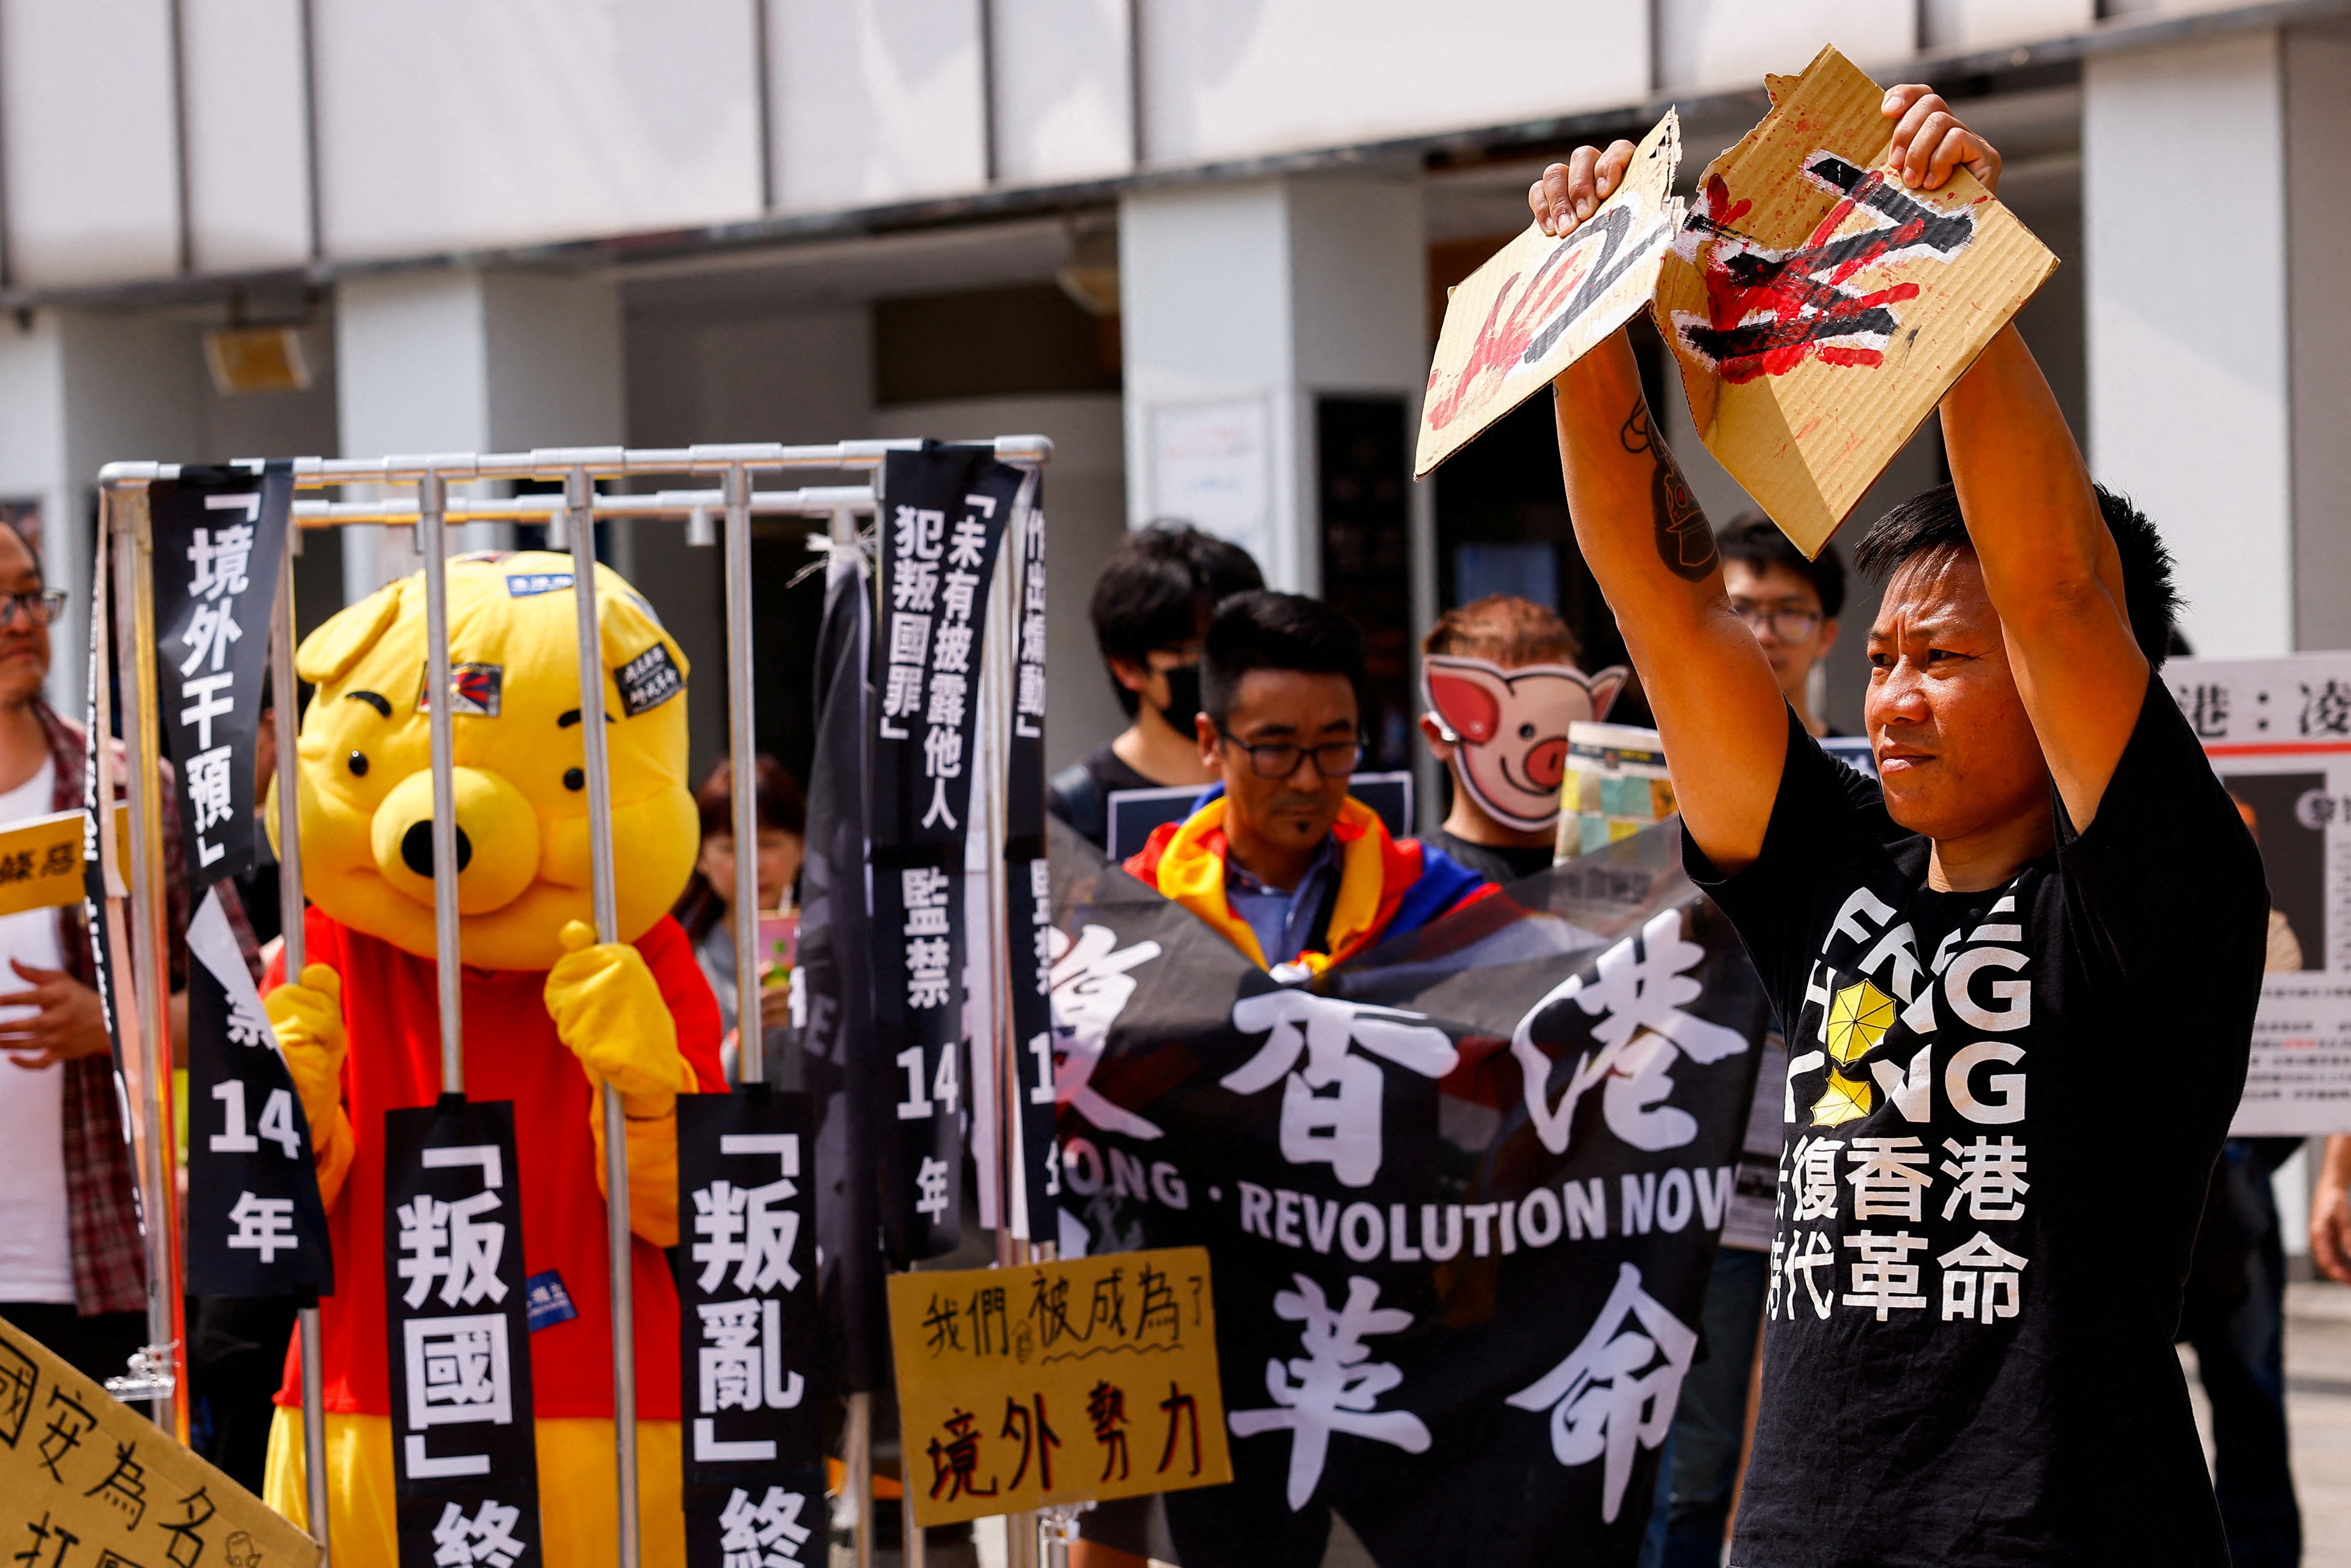 File image: Henry Tong, an exiled Hong Kong activist who is currently living in Taiwan, tears apart a cardboard with 23 on it, during a protest against Hong Kong's Article 23 national security law in Taipei, Taiwan